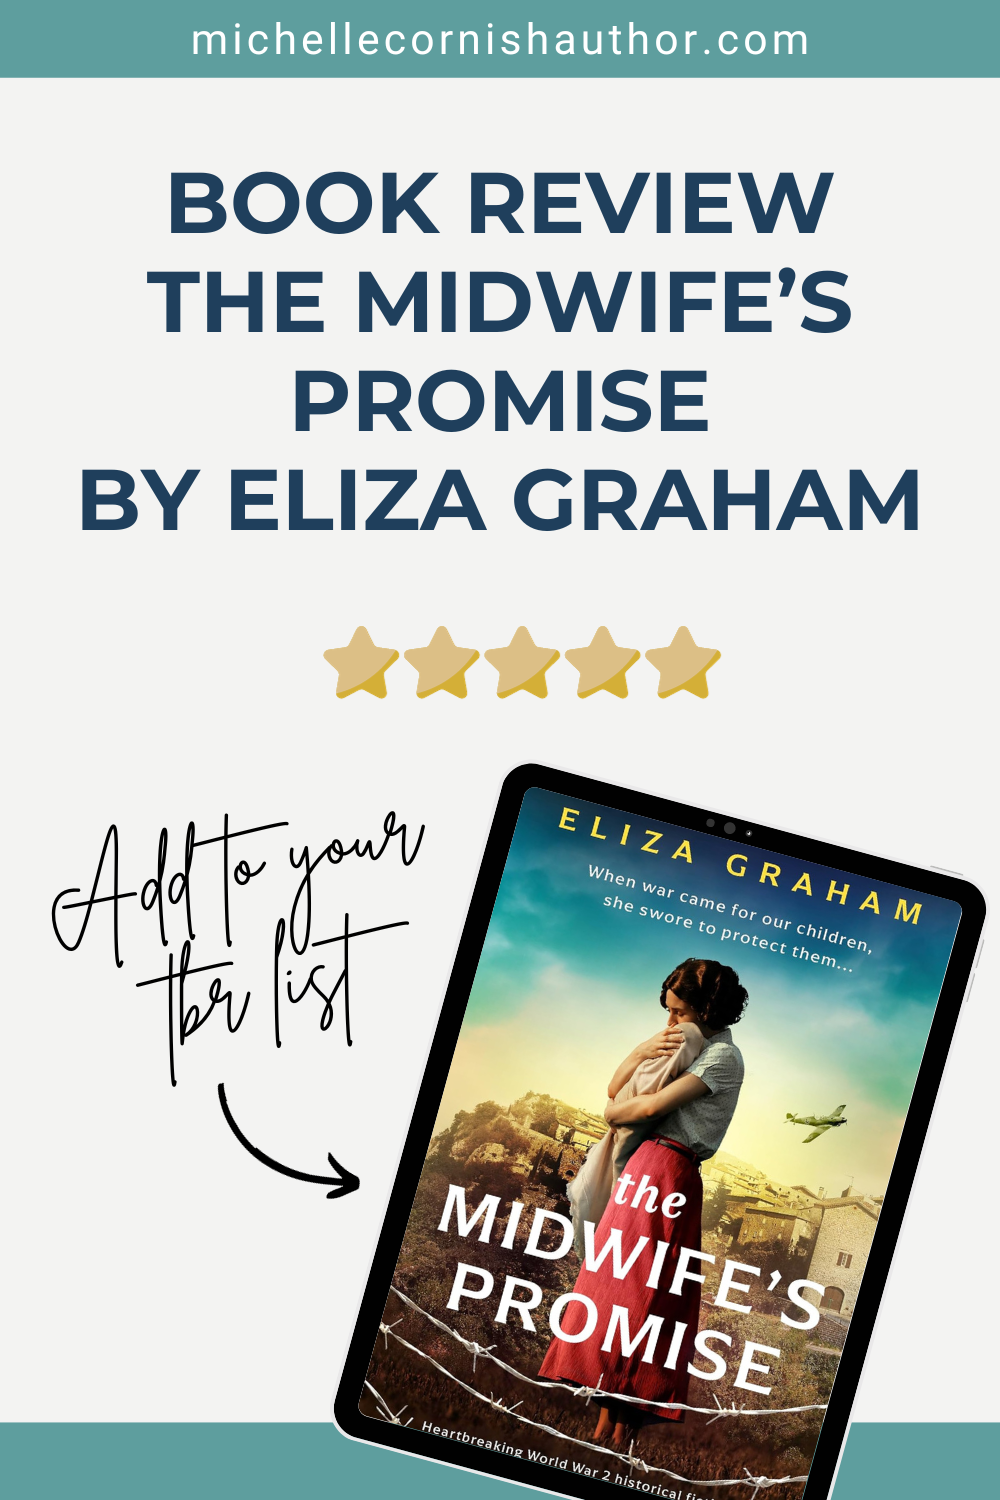 Book Review of The Midwife's Promise by Eliza Graham